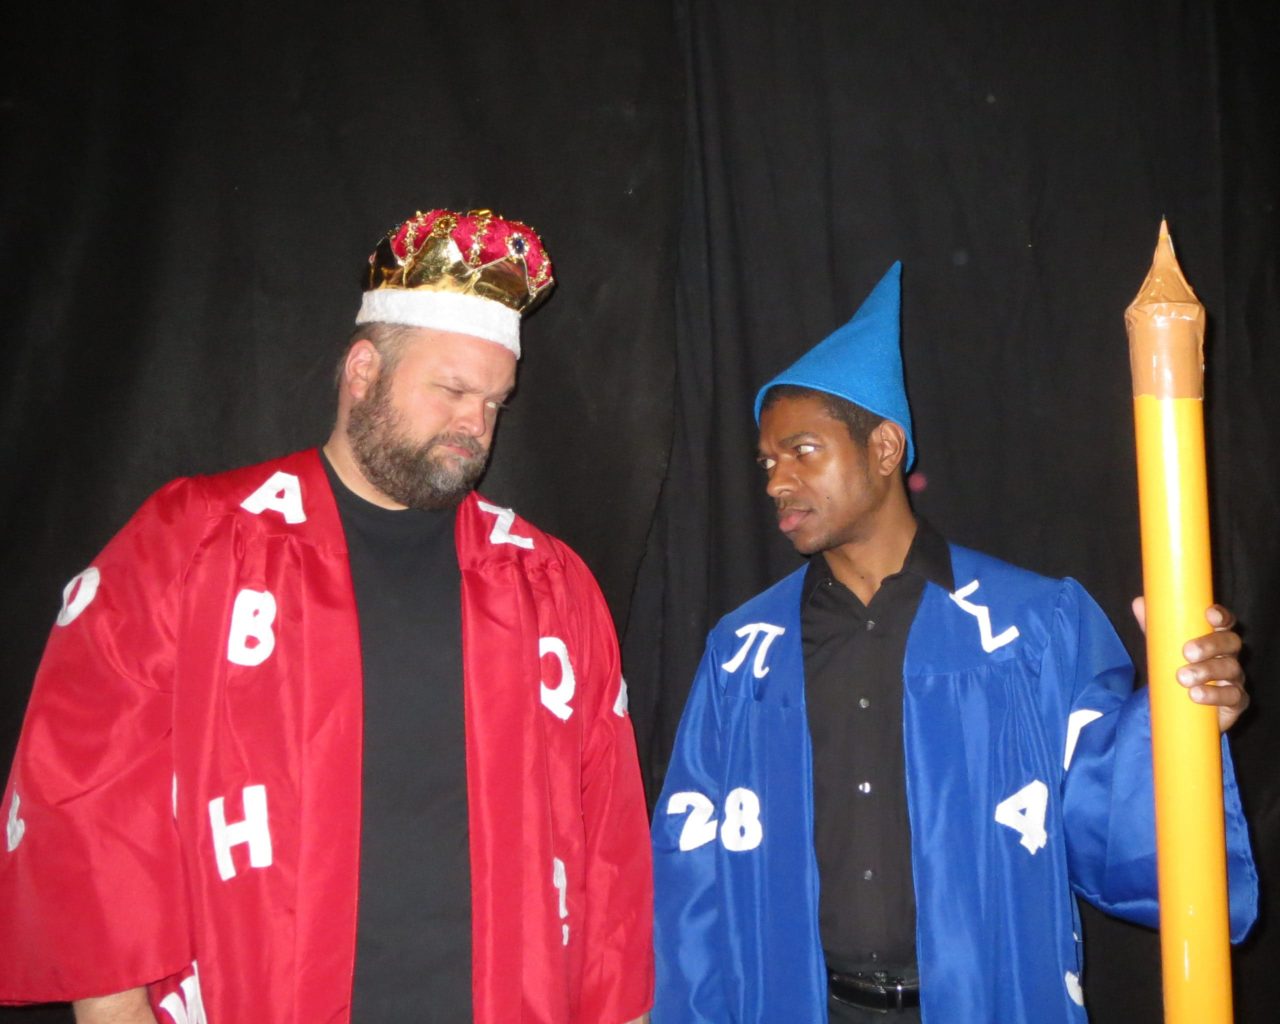 King Azaz of Dictionopolis (Dave Buckingham) and the Mathemagician (Wes Dennis) have a disagreement in 'The Phantom Tollbooth' at Greenbelt Arts Center. Photo by Anne Gardner.